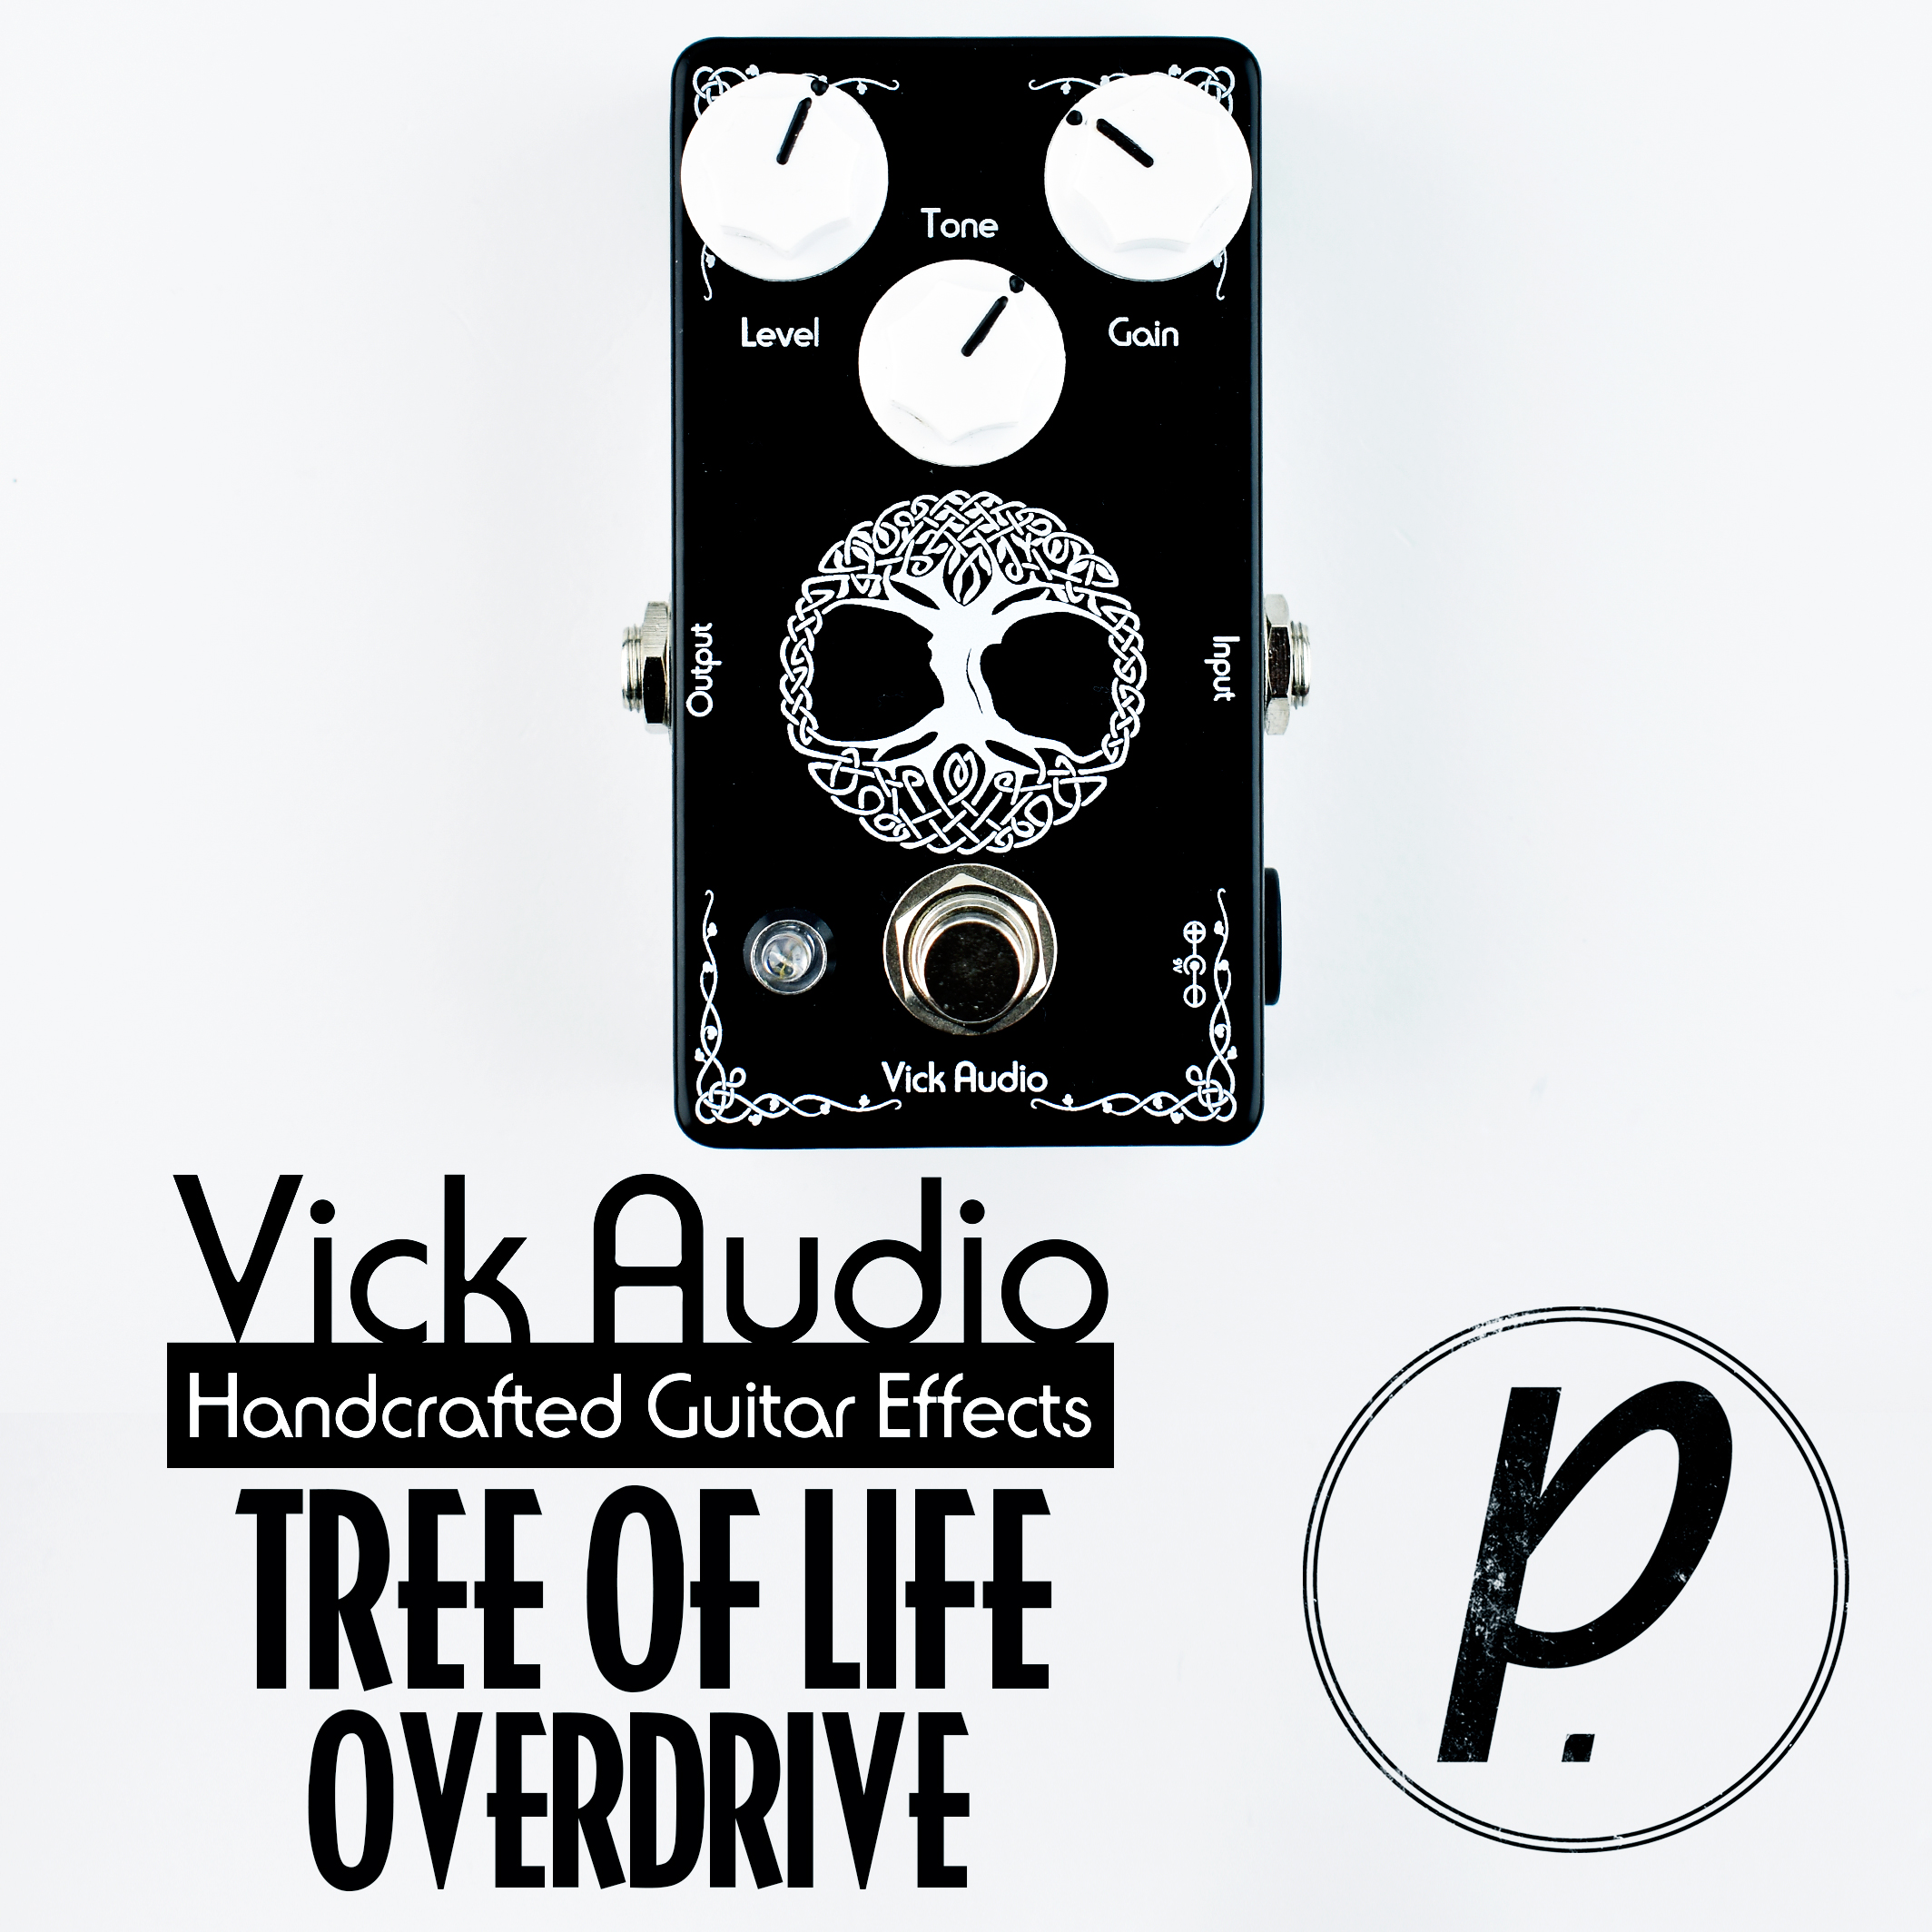 FREE 2 DAY SHIP Vick Audio Tree of Life Overdrive 